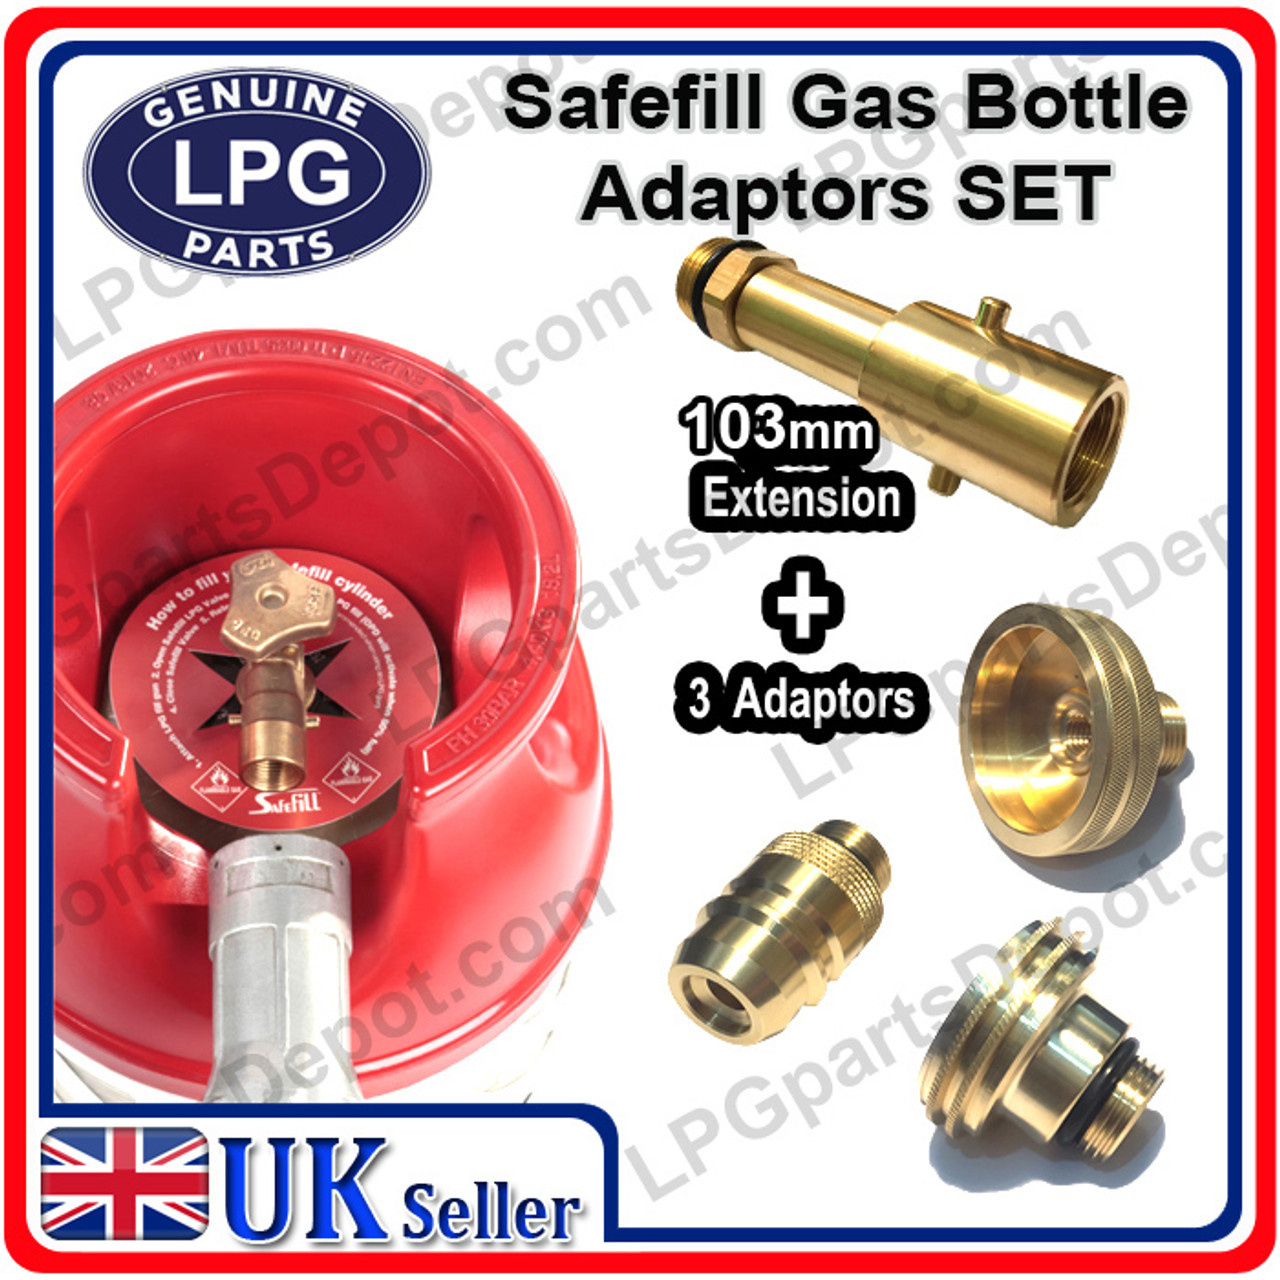 UK BAYONET W21.8 TO ALL OF EUROPE LPG AUTOGAS ADAPTERS - LPG gas